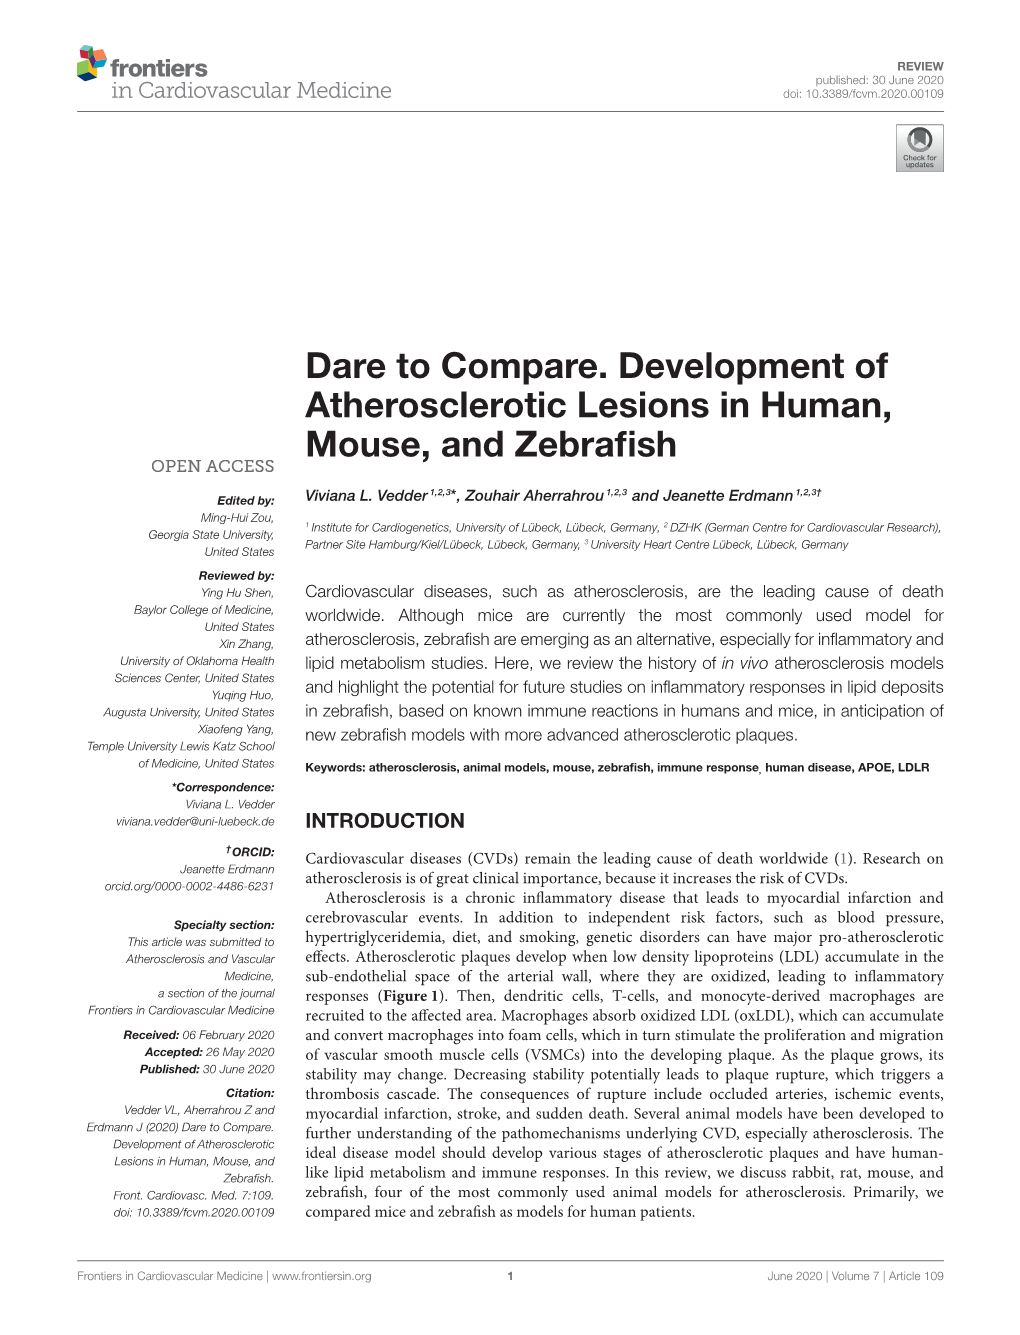 Dare to Compare. Development of Atherosclerotic Lesions in Human, Mouse, and Zebraﬁsh